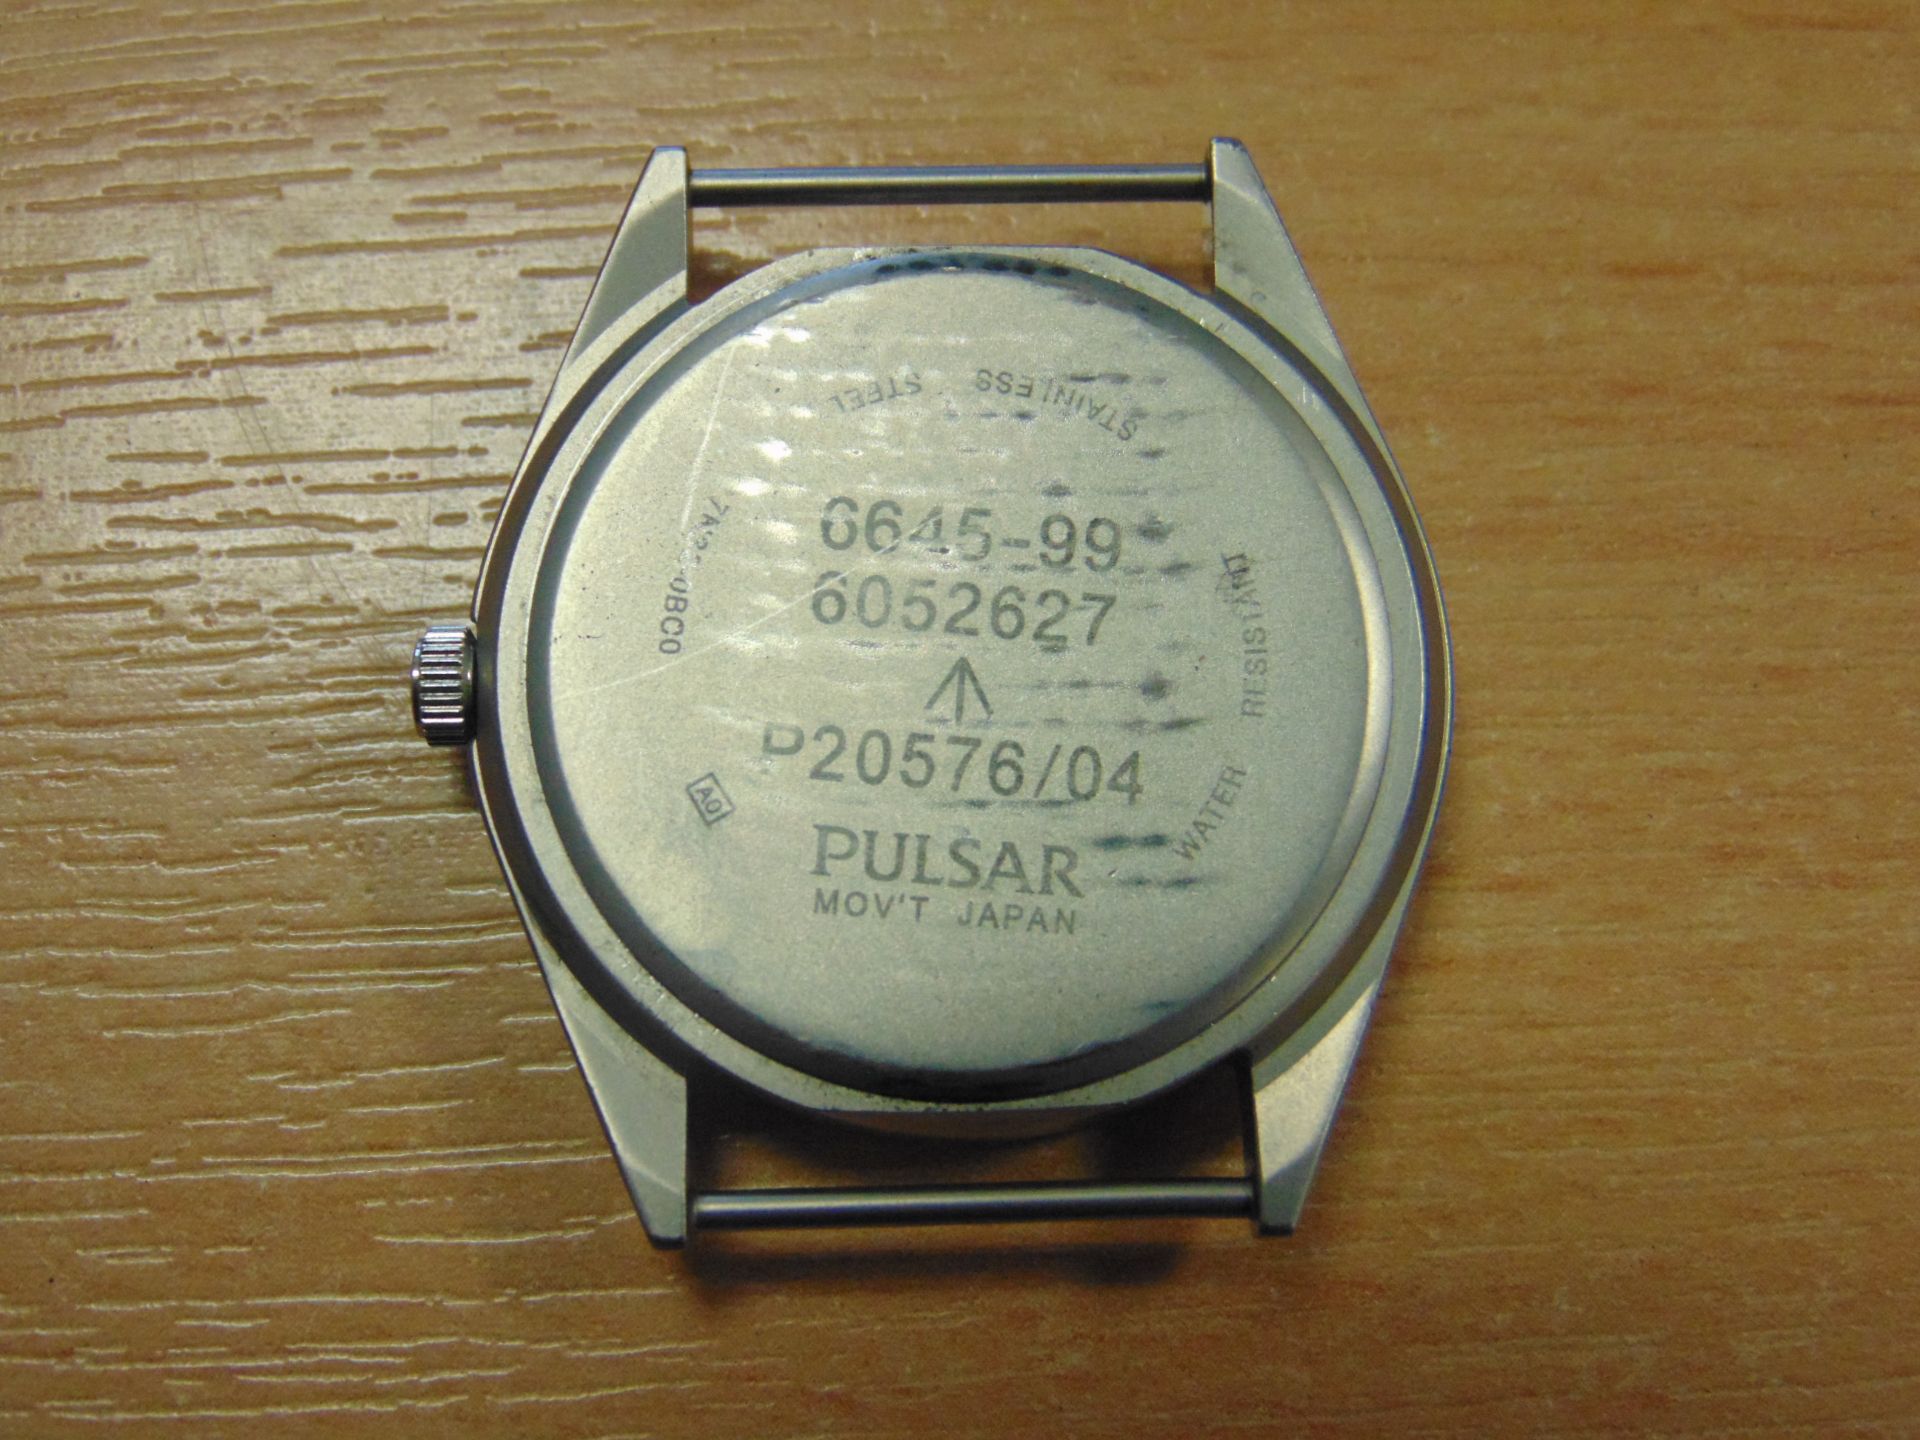 PULSAR W10 BRITISH ISSUE SERVICE WATCH NATO MARKINGS DATED 2004 - Image 10 of 12